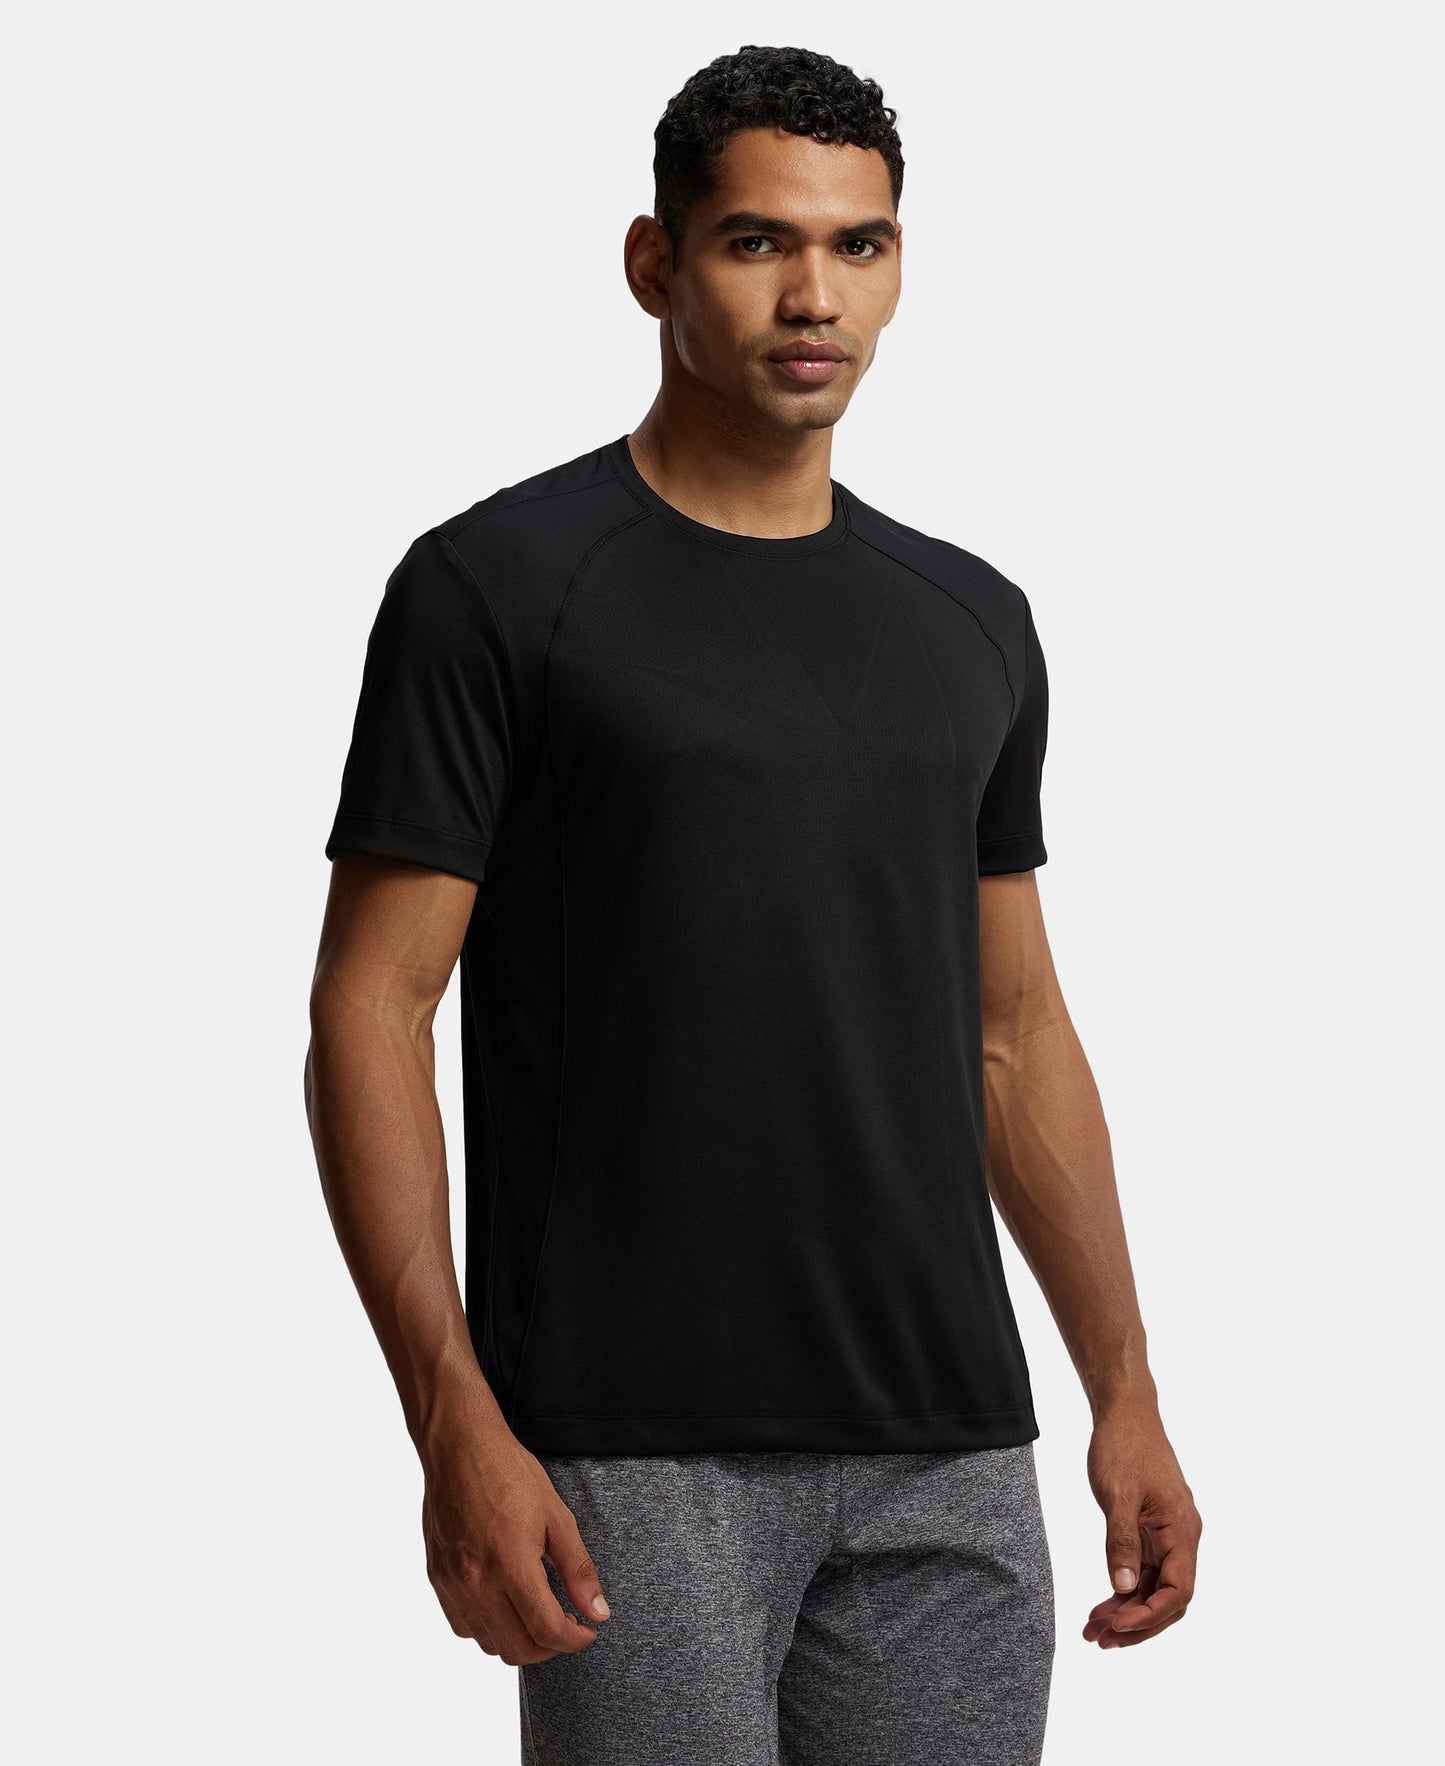 Microfiber Fabric Round Neck Half Sleeve T-Shirt with Breathable Mesh - Black-2